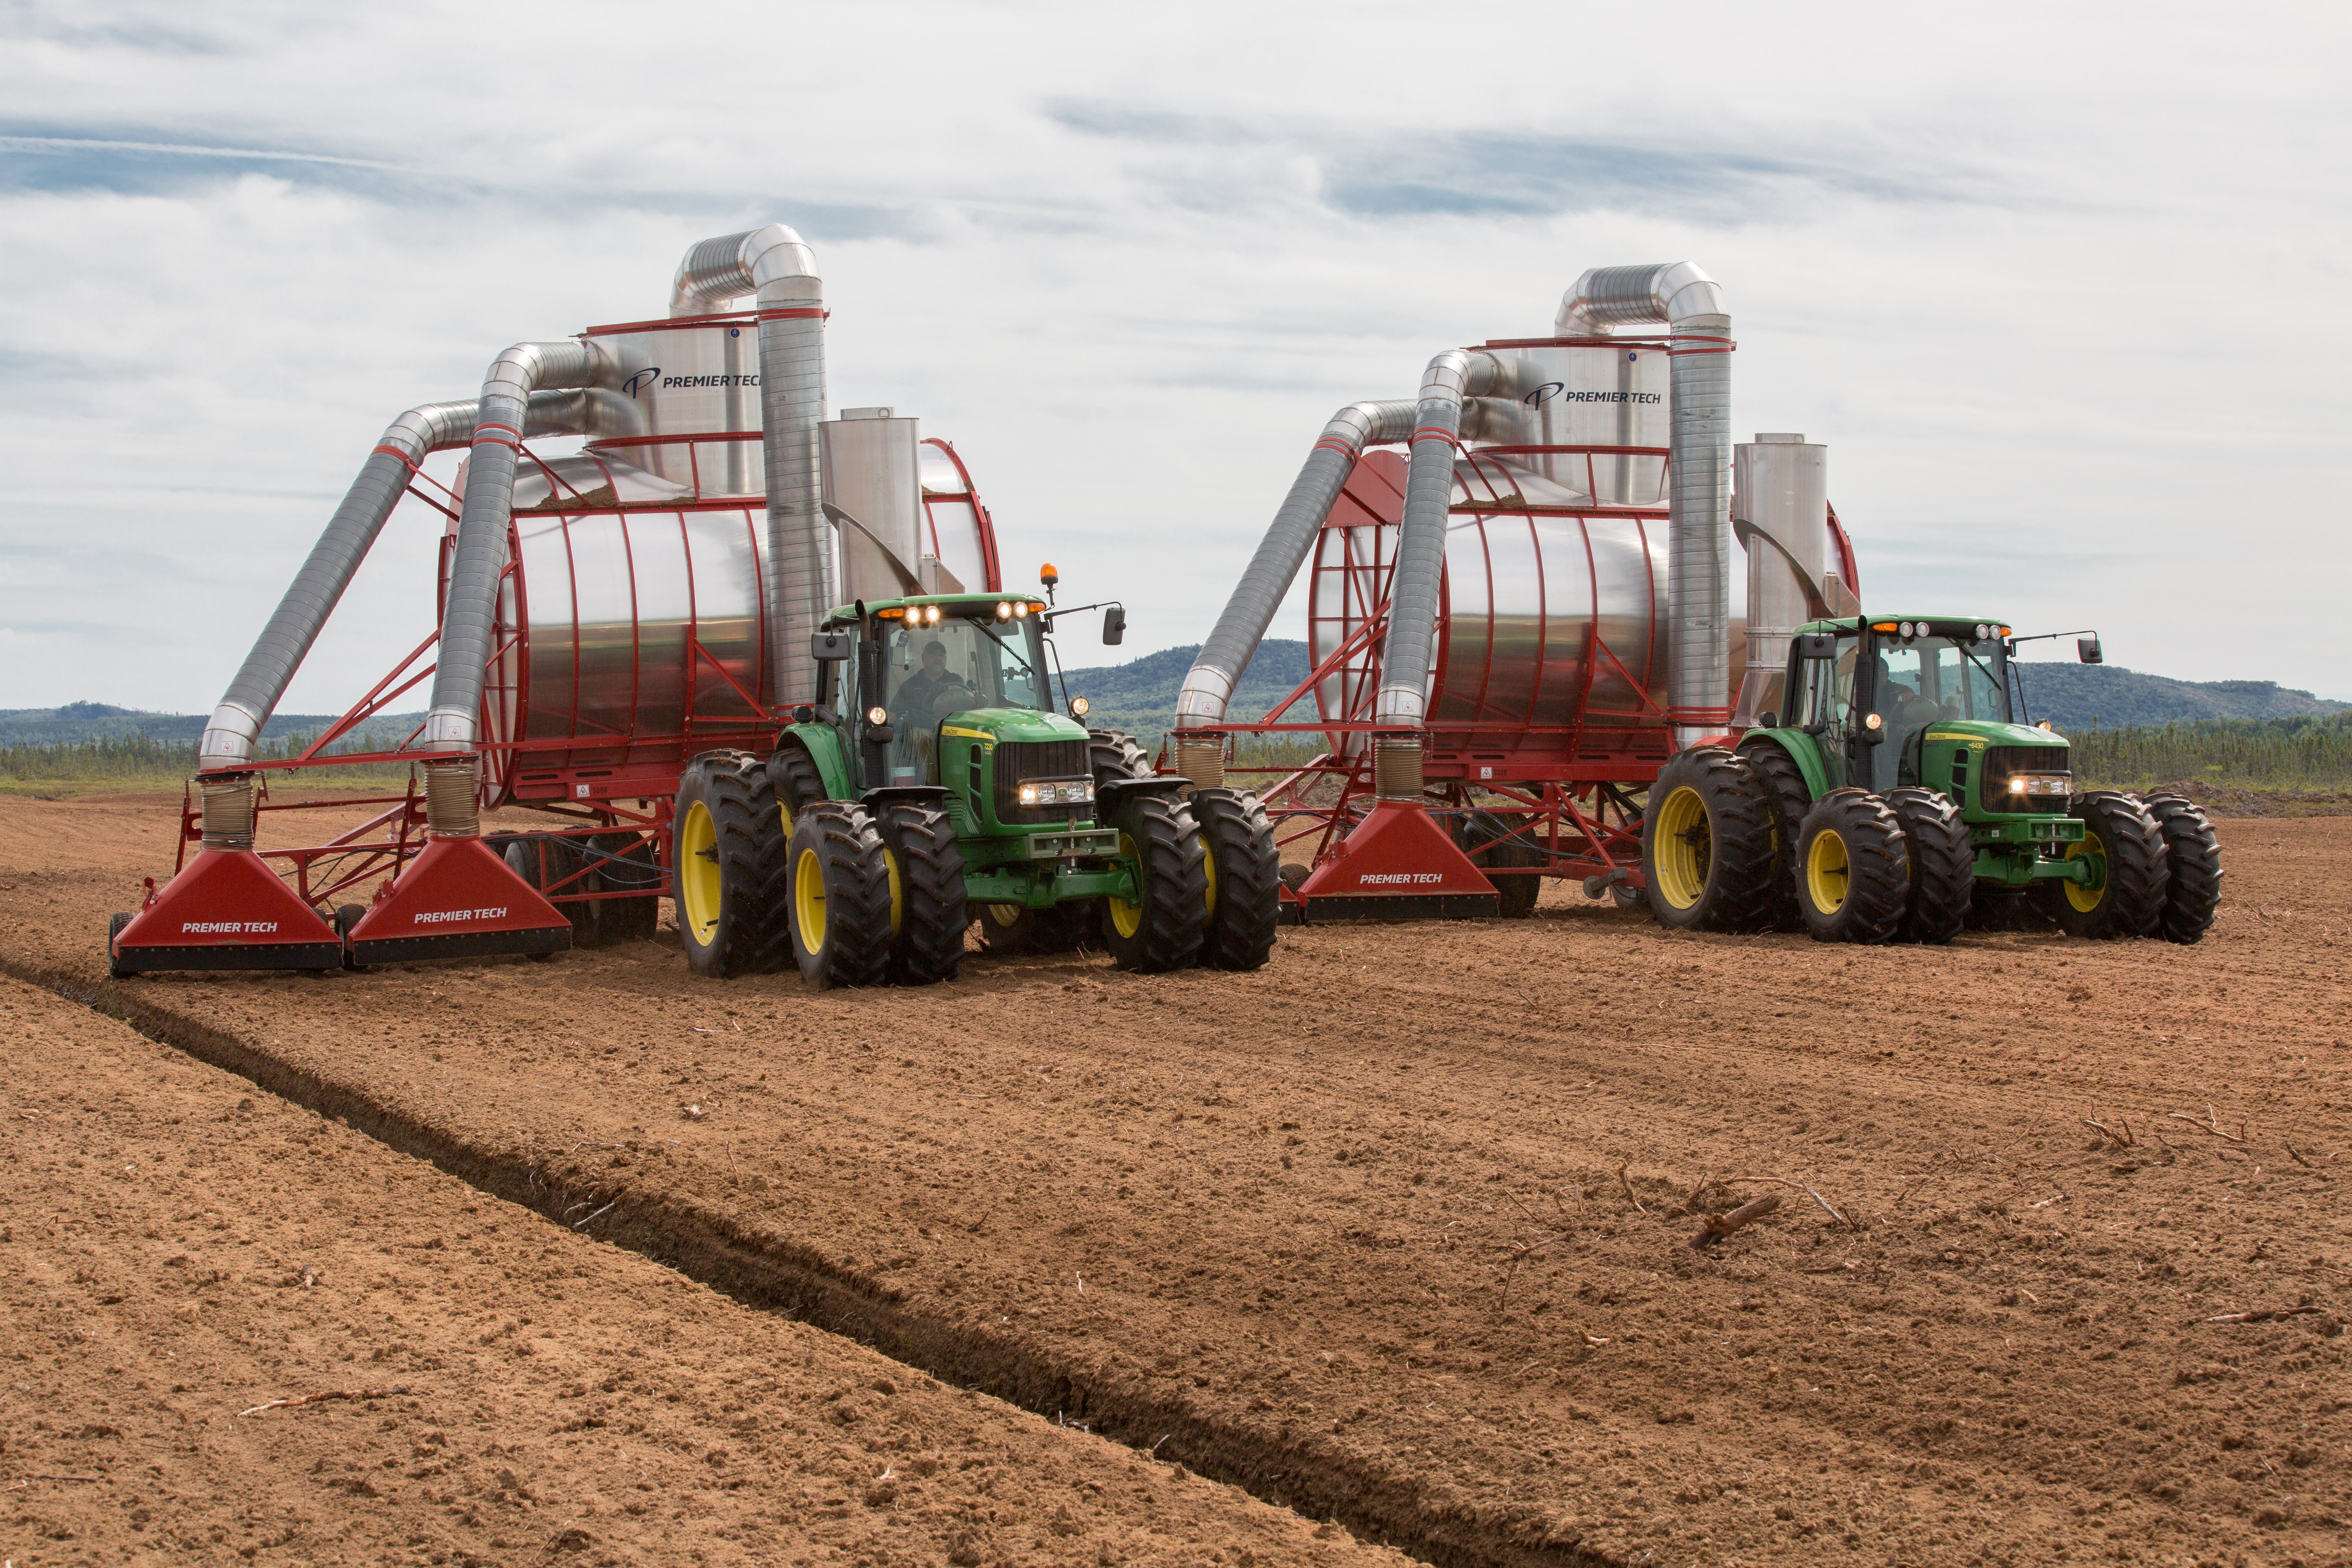 An impressive collection of heavy-duty farming machinery at work